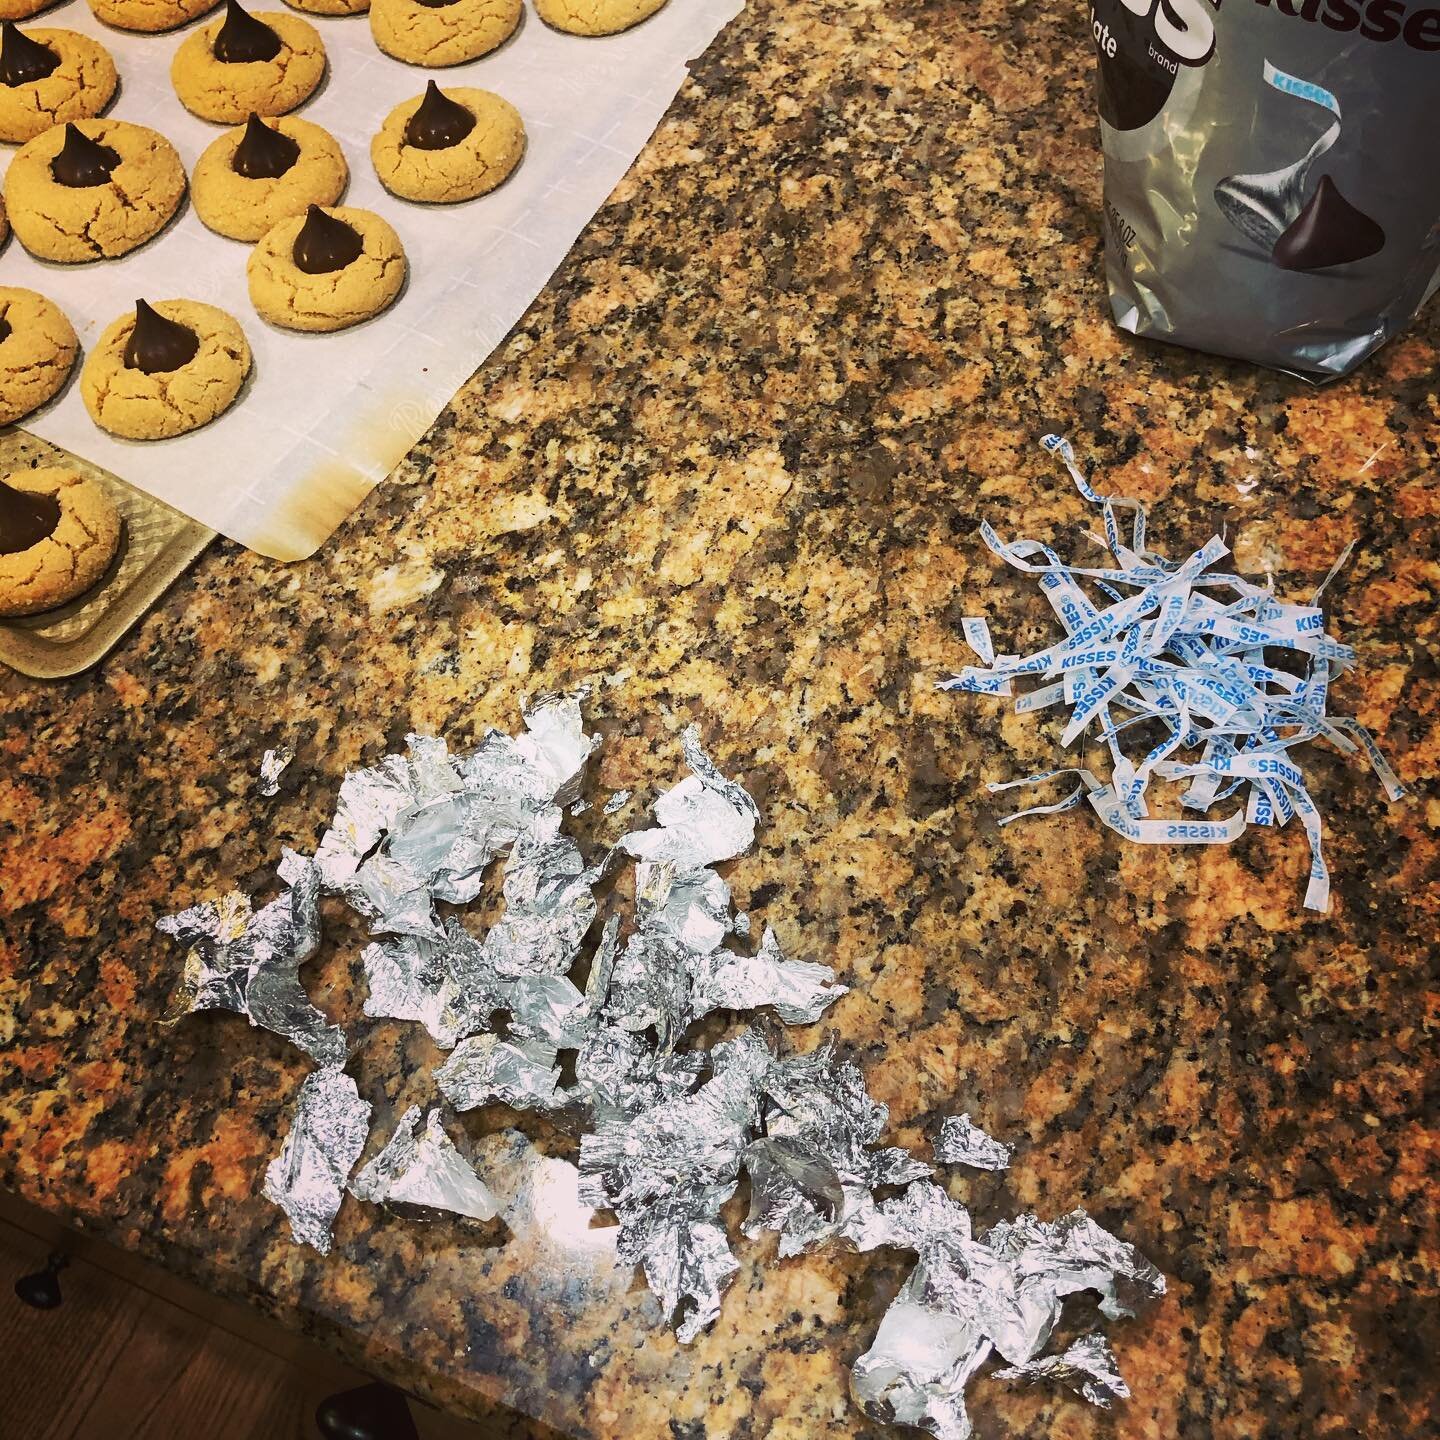 Remember, recycle your aluminum wrappers from your Hersey Kisses.

Happy Holidays!

#recycle #aluminum #peanutbutterblossoms #herseykisses